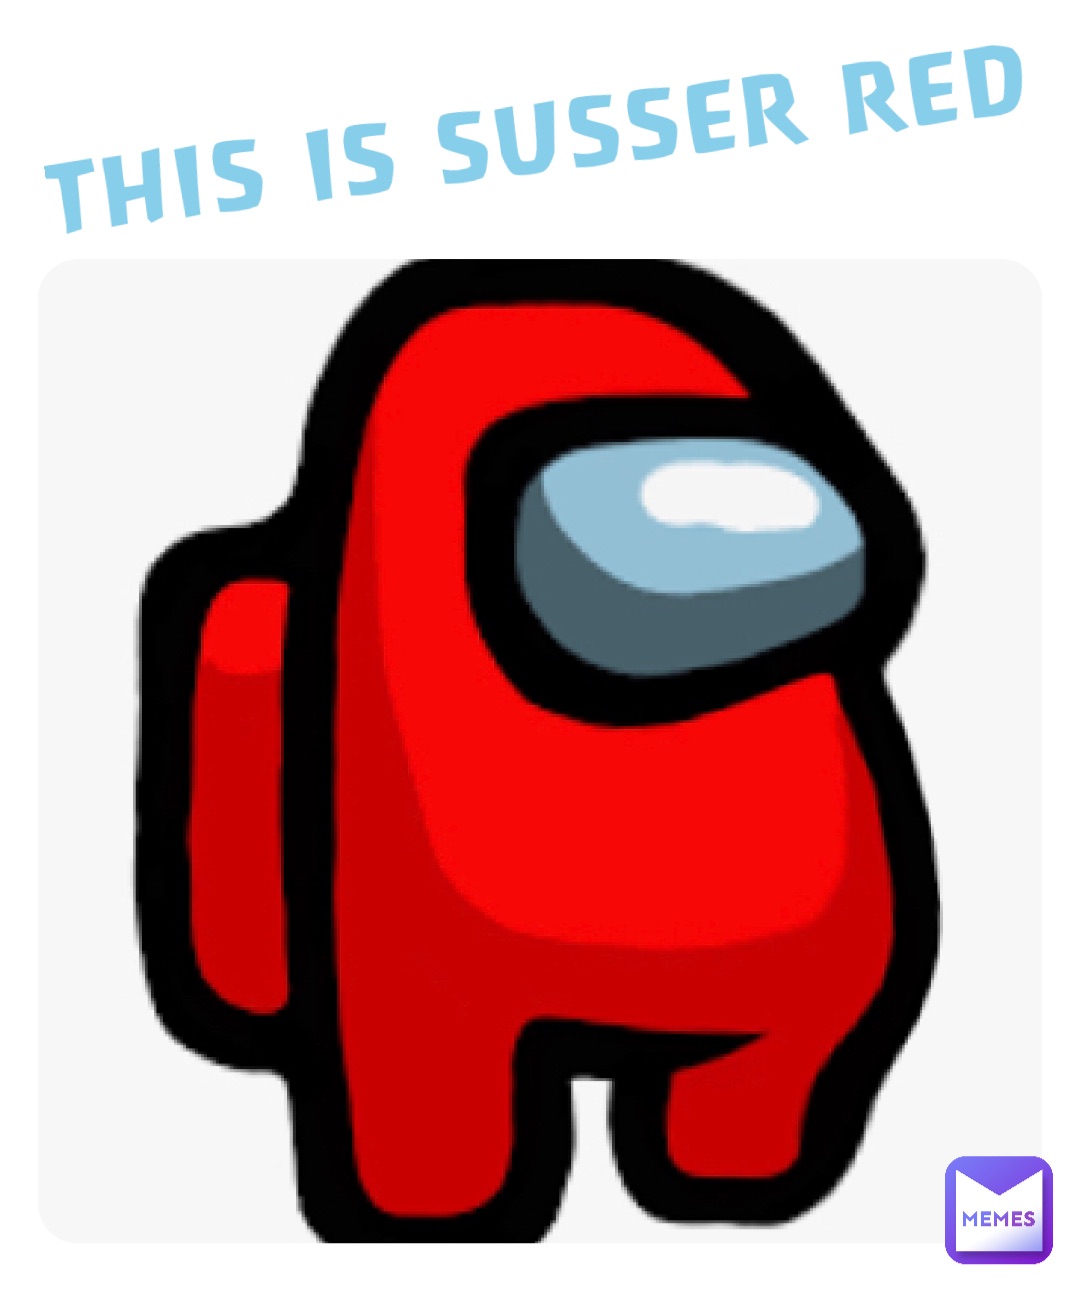 THIS IS SUSSER RED